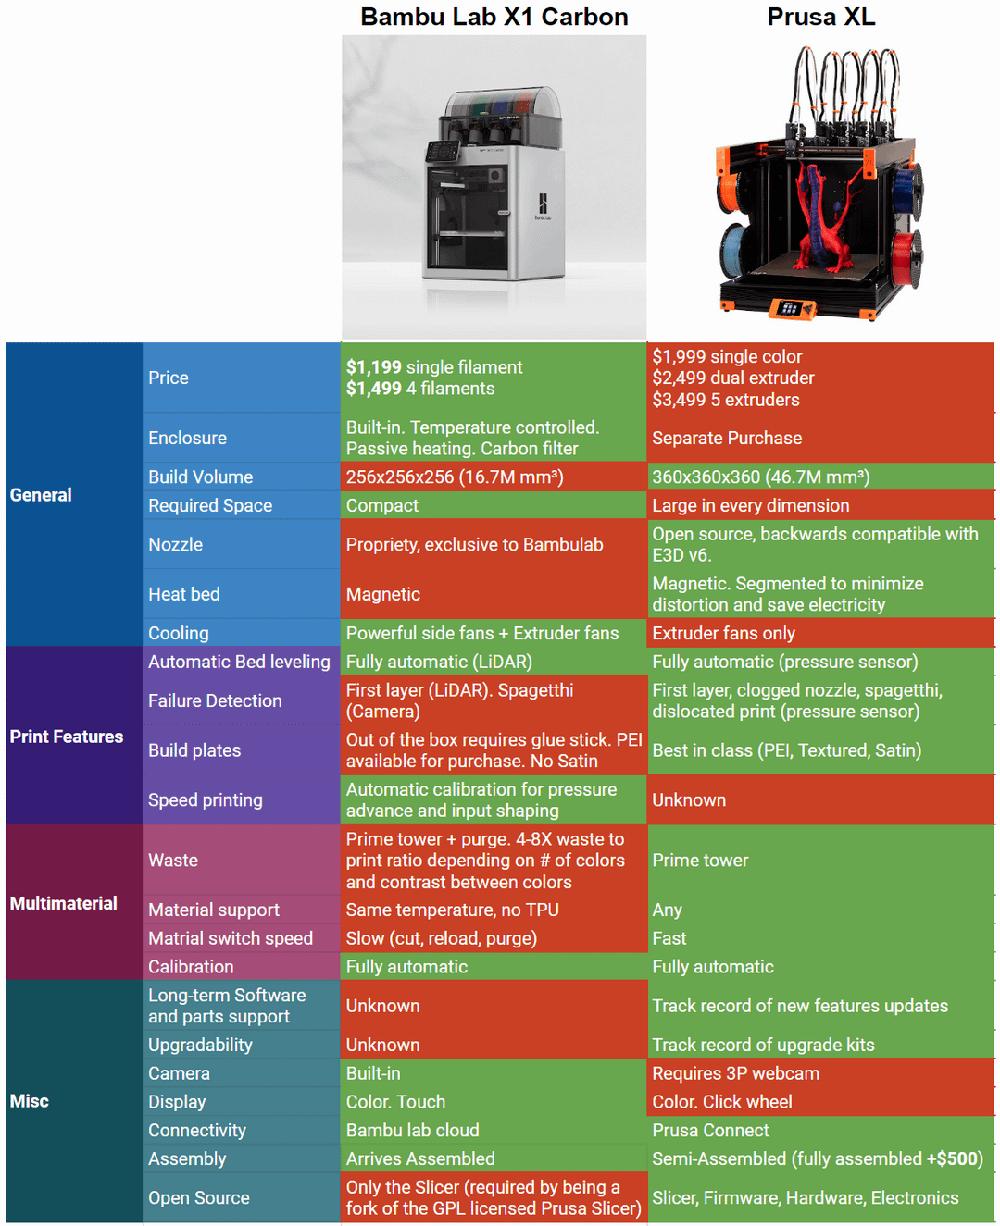 A comparison chart of the features of the Bambu Lab X1 Carbon 3D printer and the Prusa XL 3D printer.